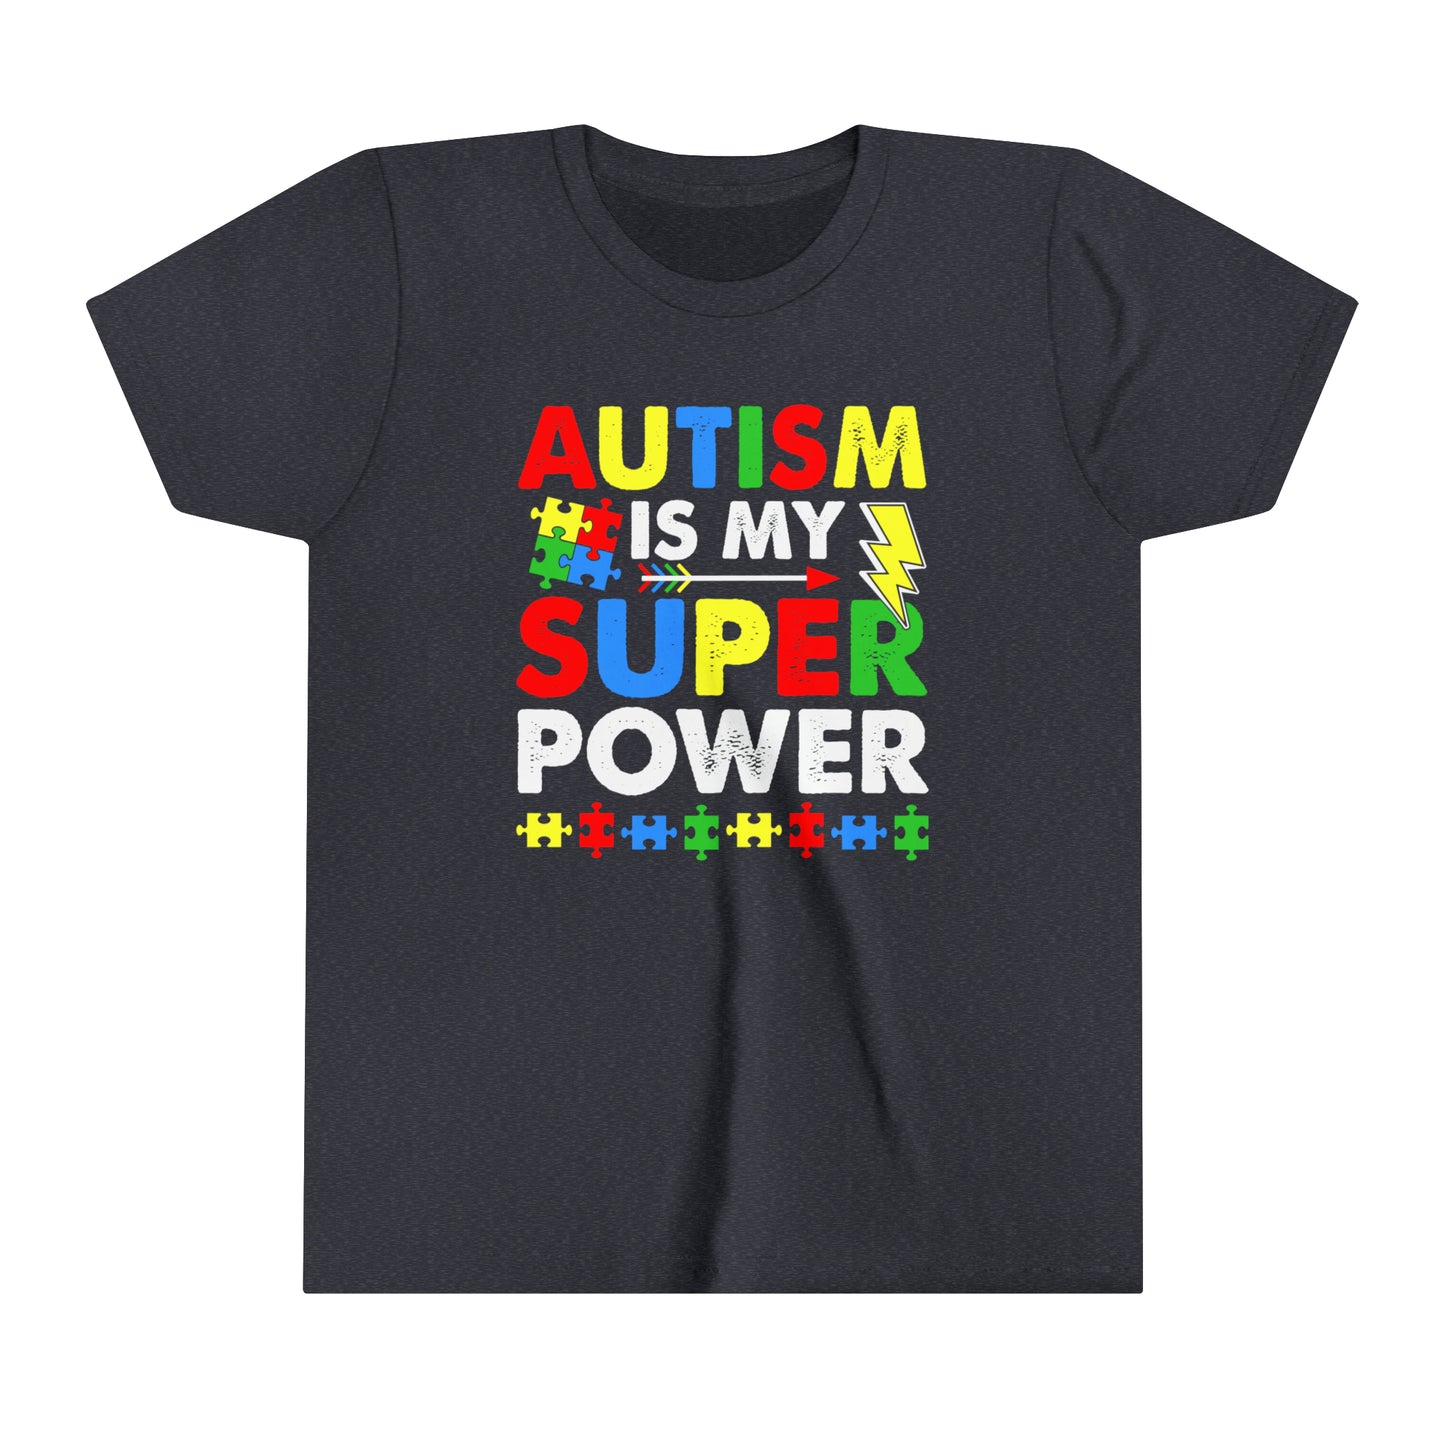 Autism is my super power Autism Awareness Advocate Youth Shirt